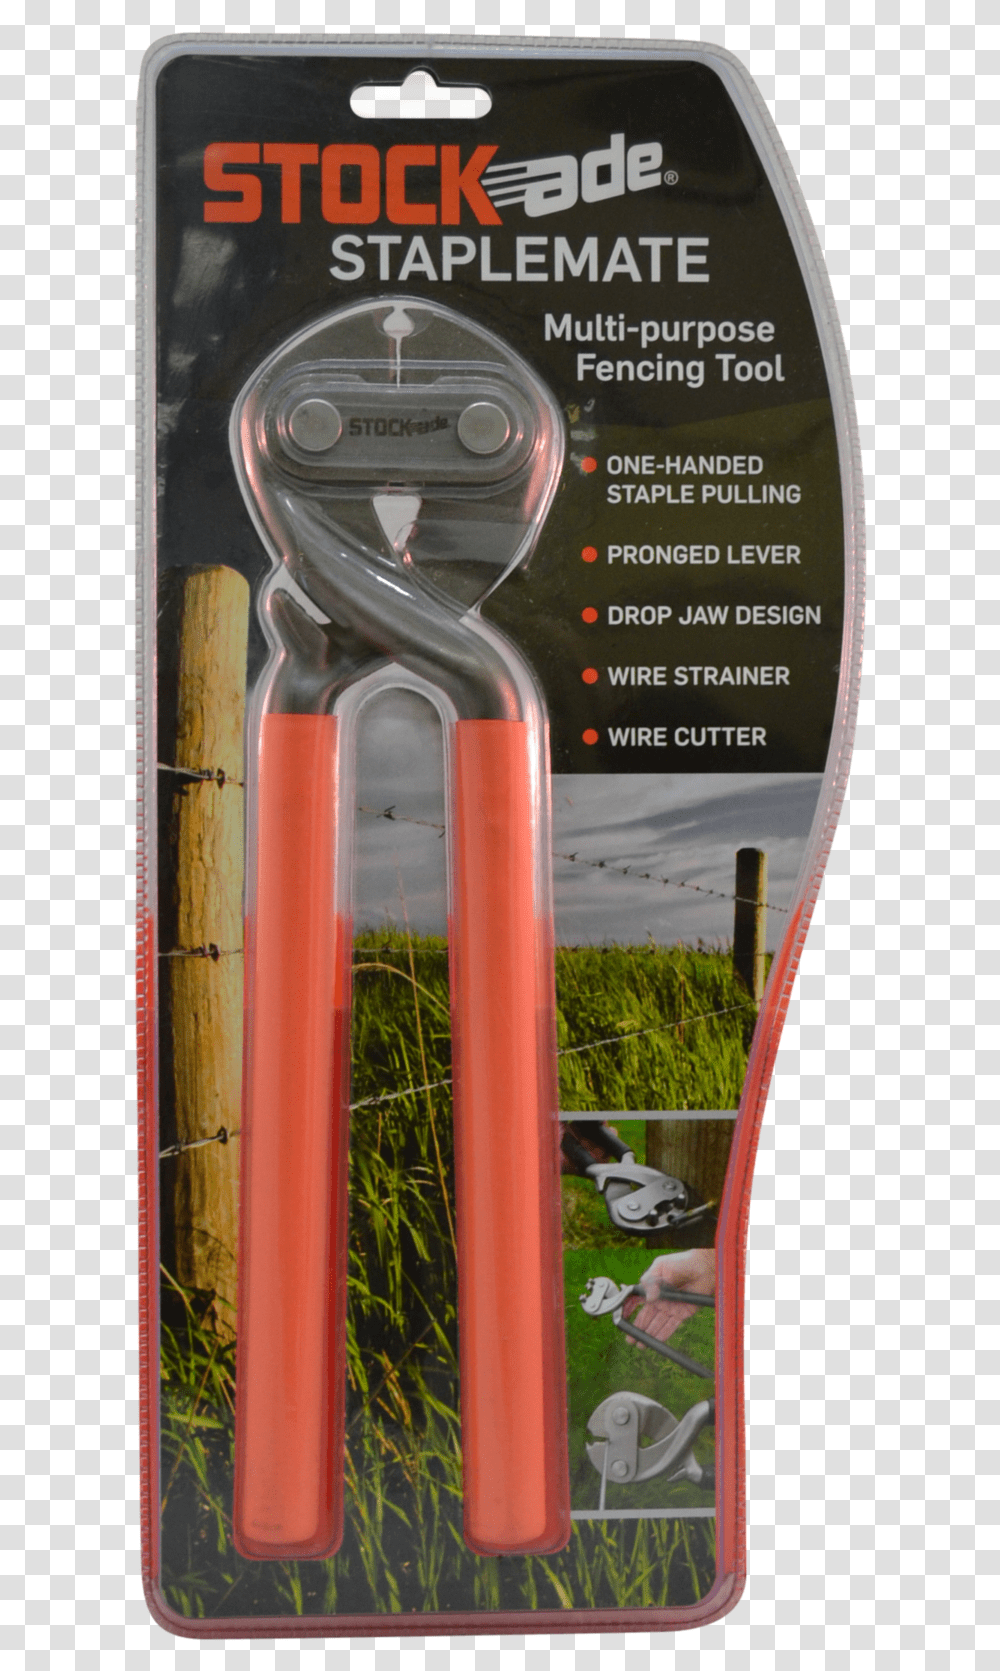 Stockade Staplemate Staple Puller Fence Tool, Mobile Phone, Electronics, Advertisement, Poster Transparent Png